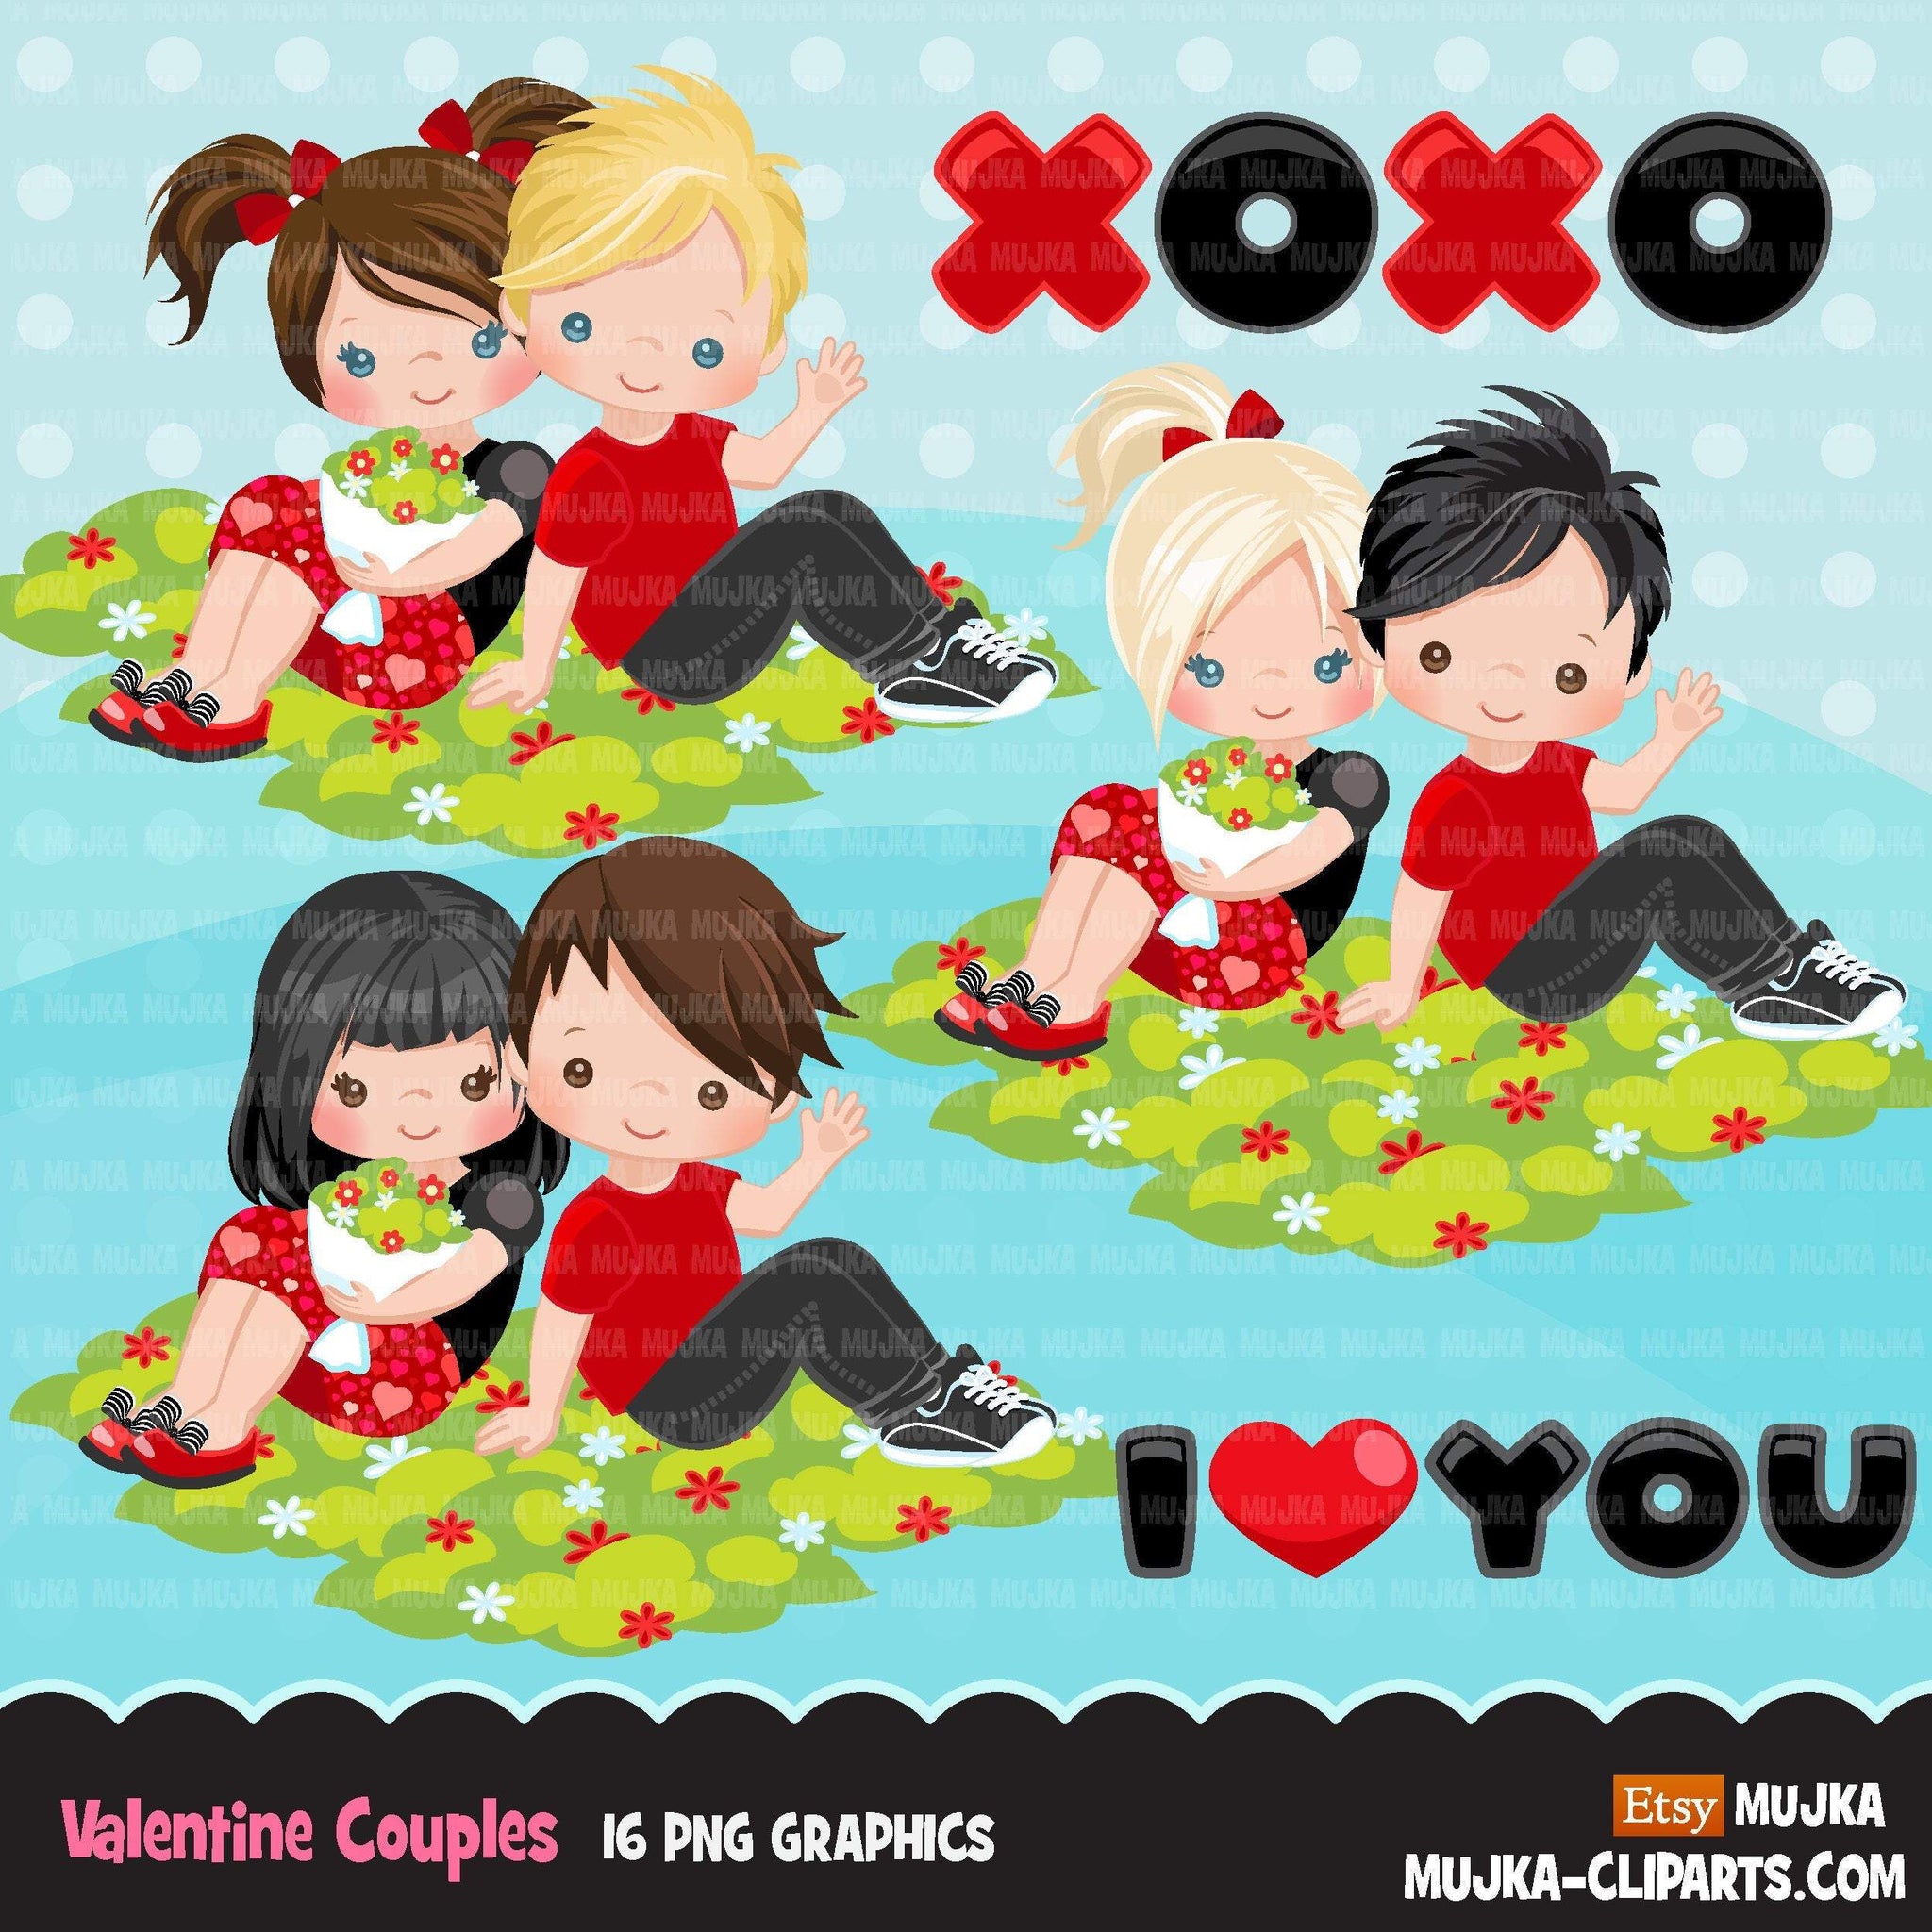 Valentine's Day Clipart, Cute Valentine kids, couples sitting, XOXO valentine graphics, commercial use clip art